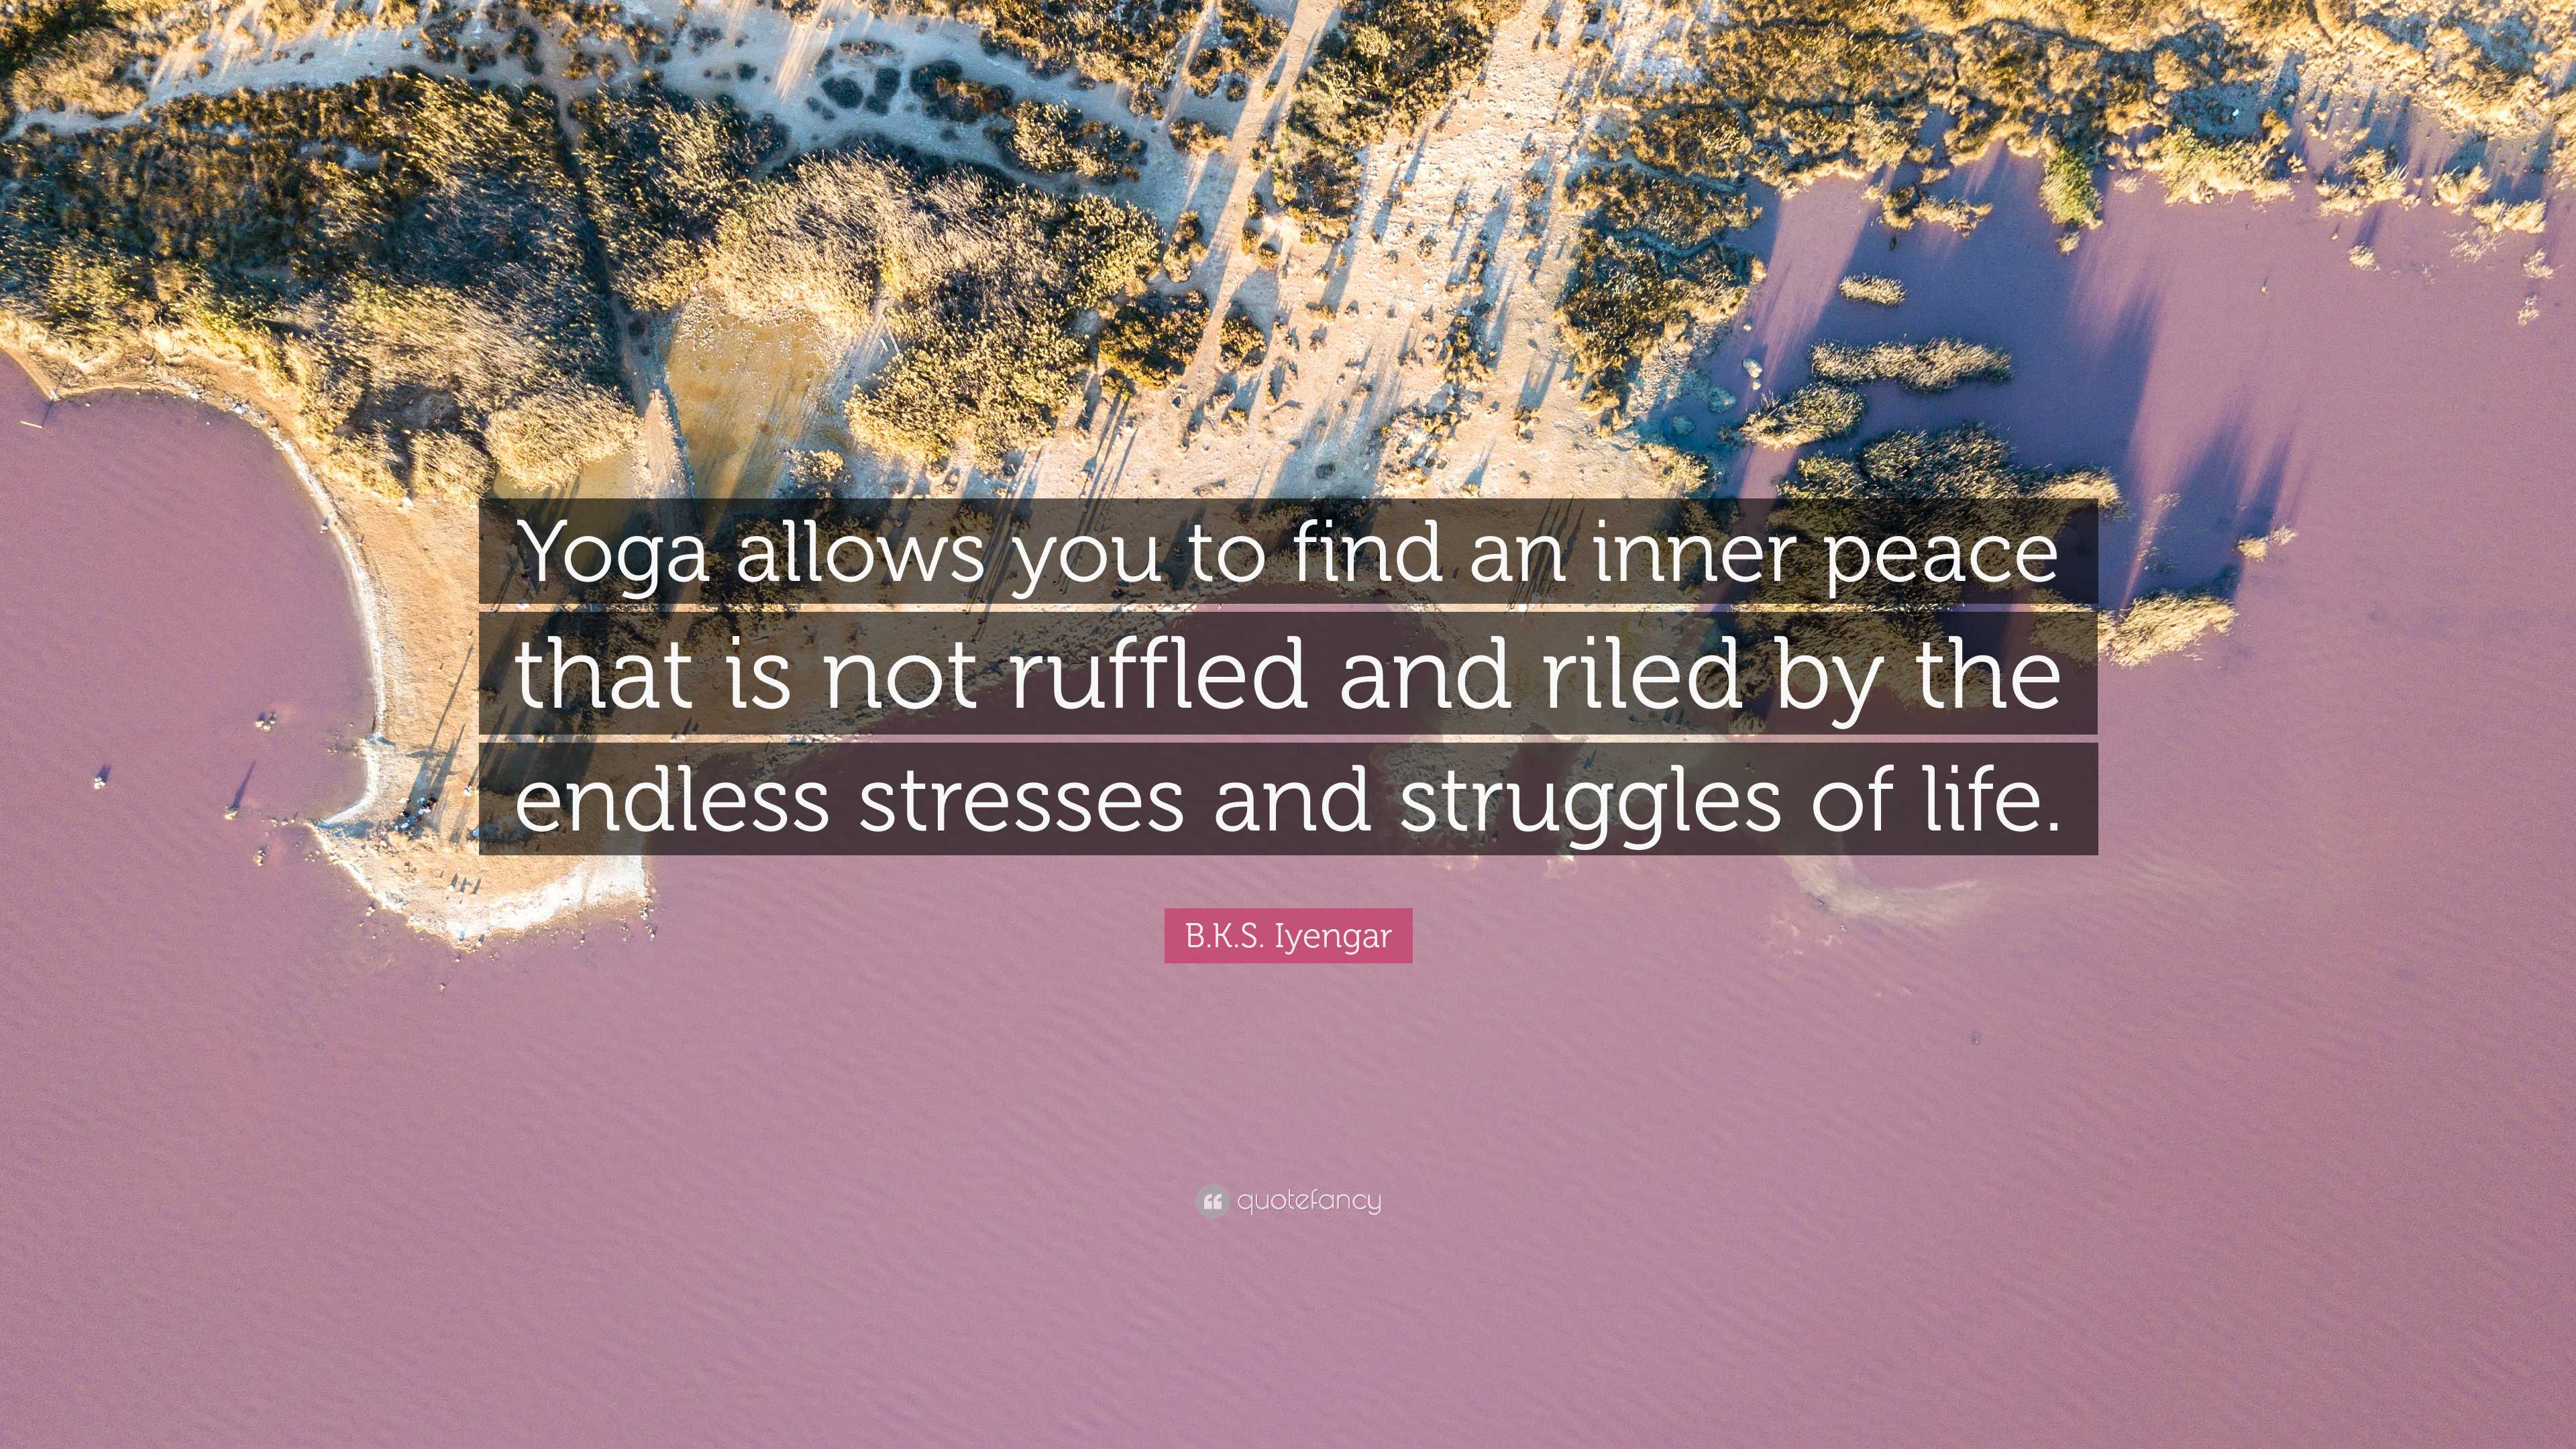 Yoga girls. Who are you finding inner peace with? : r/TrueFMK